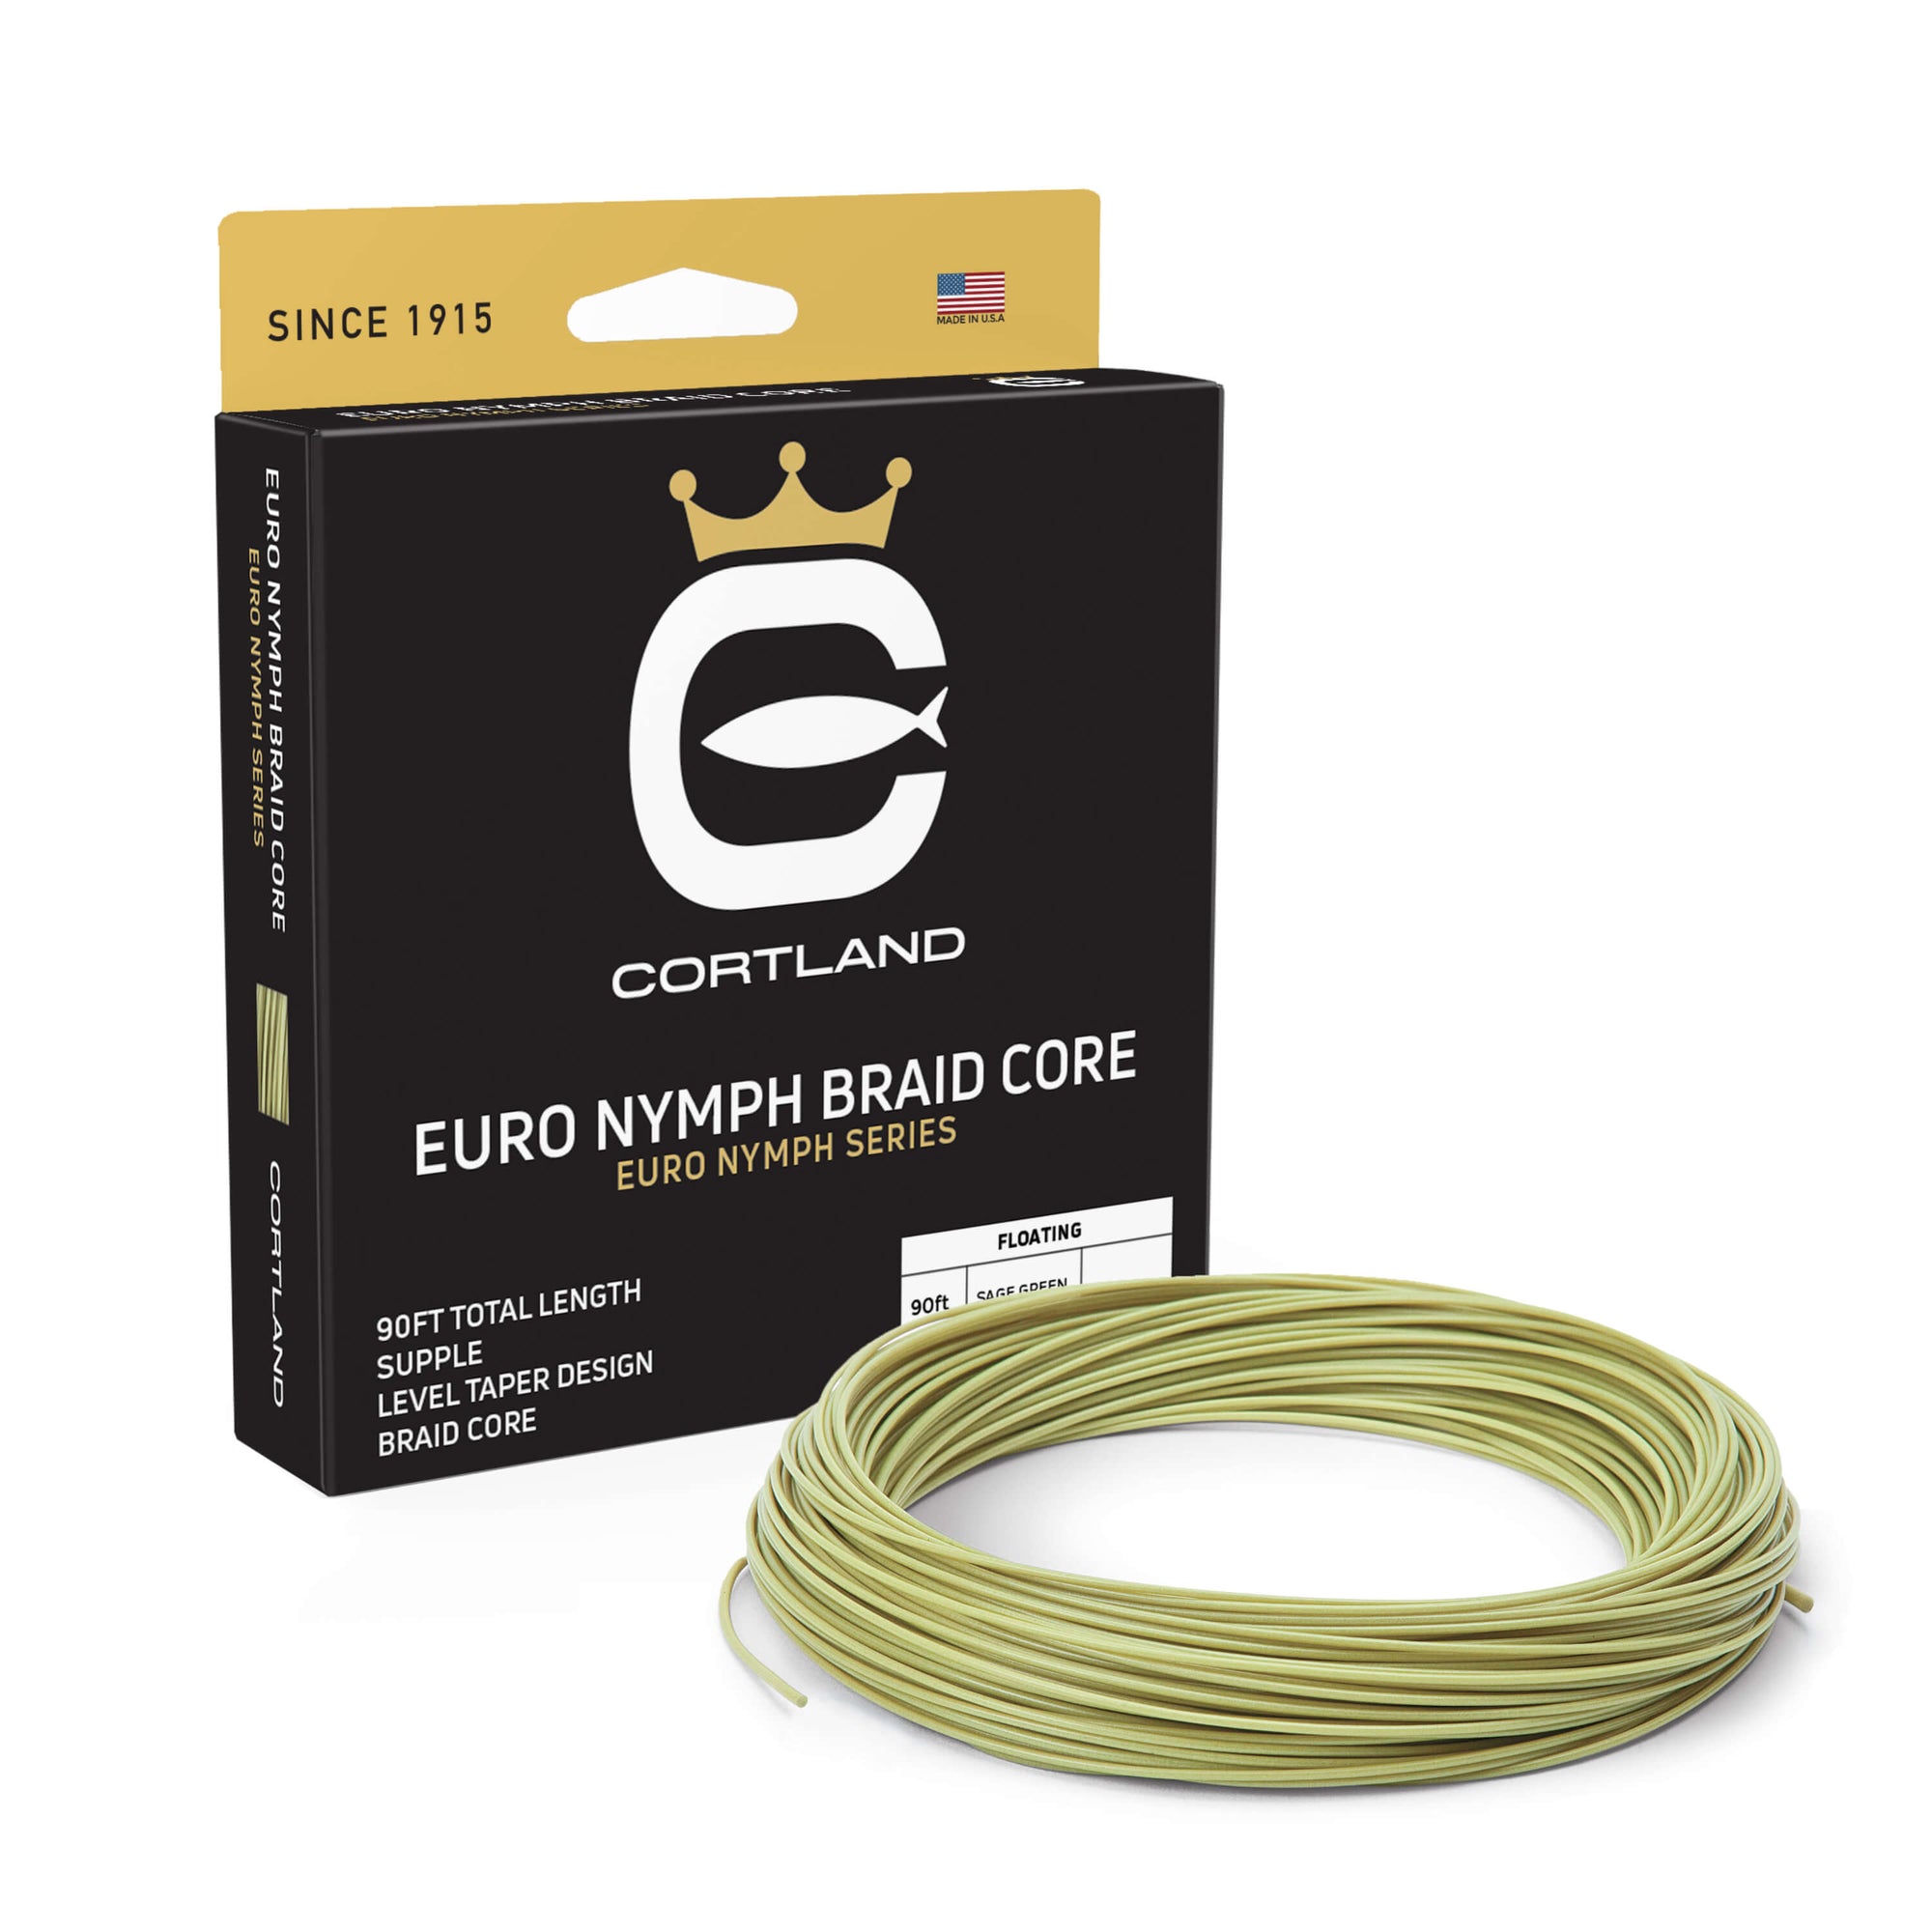 Euro Nymph Braid Core fly line box and coil. The color of the coil is sage green. The box has the Cortland Logo and is black and bronze.